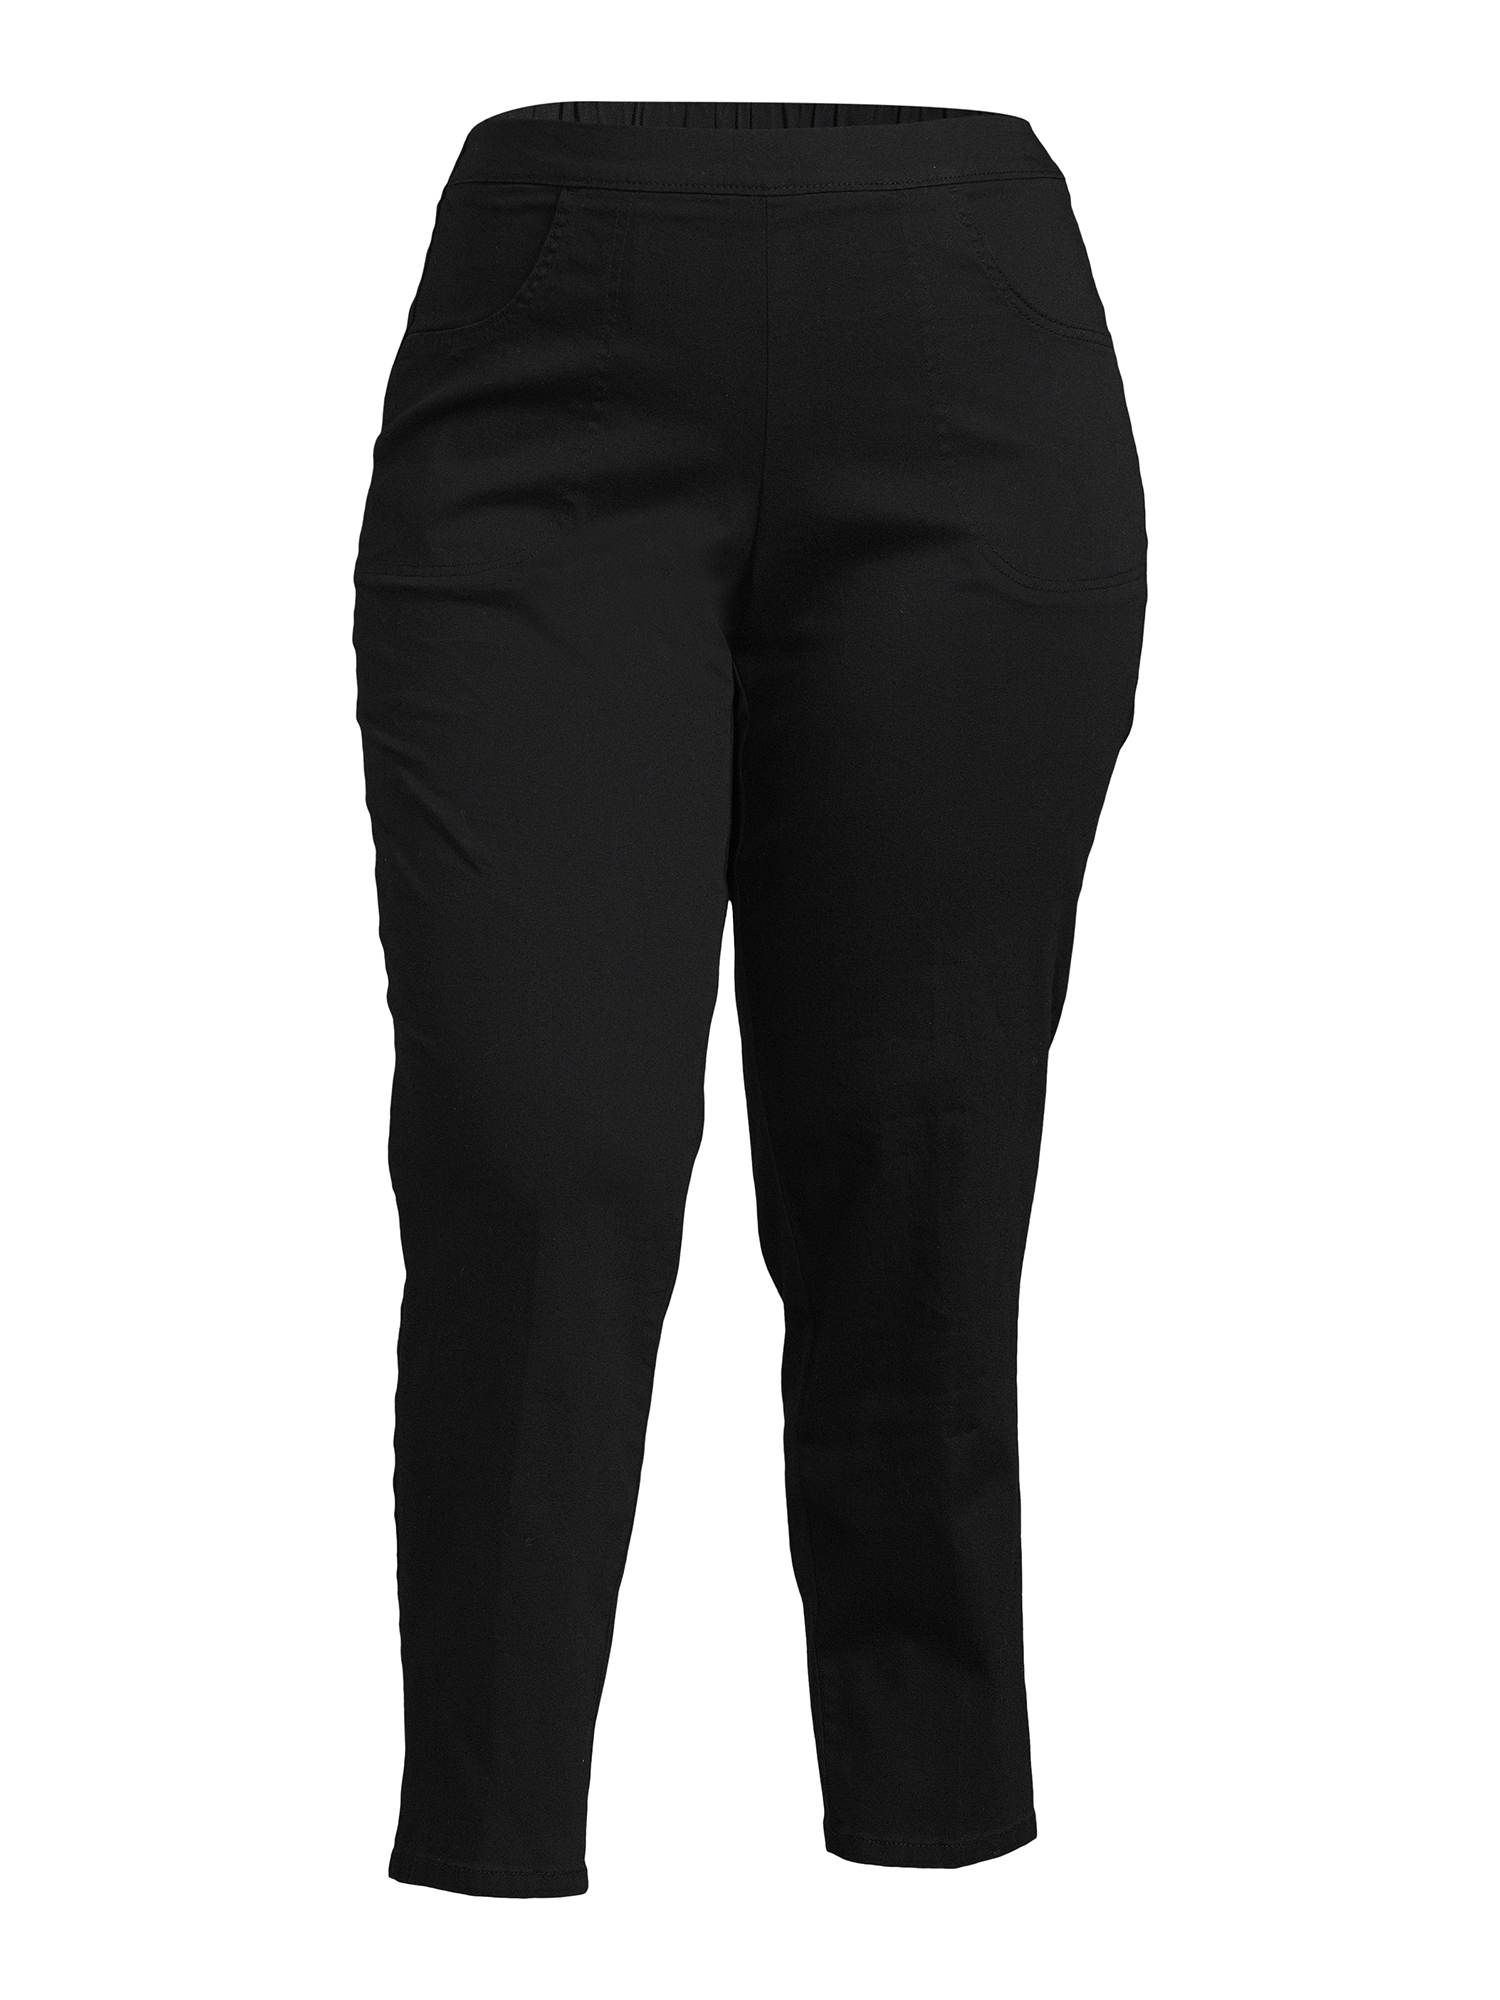 Just My Size Women's Plus 2 Pocket Pull-On Pant - image 5 of 6